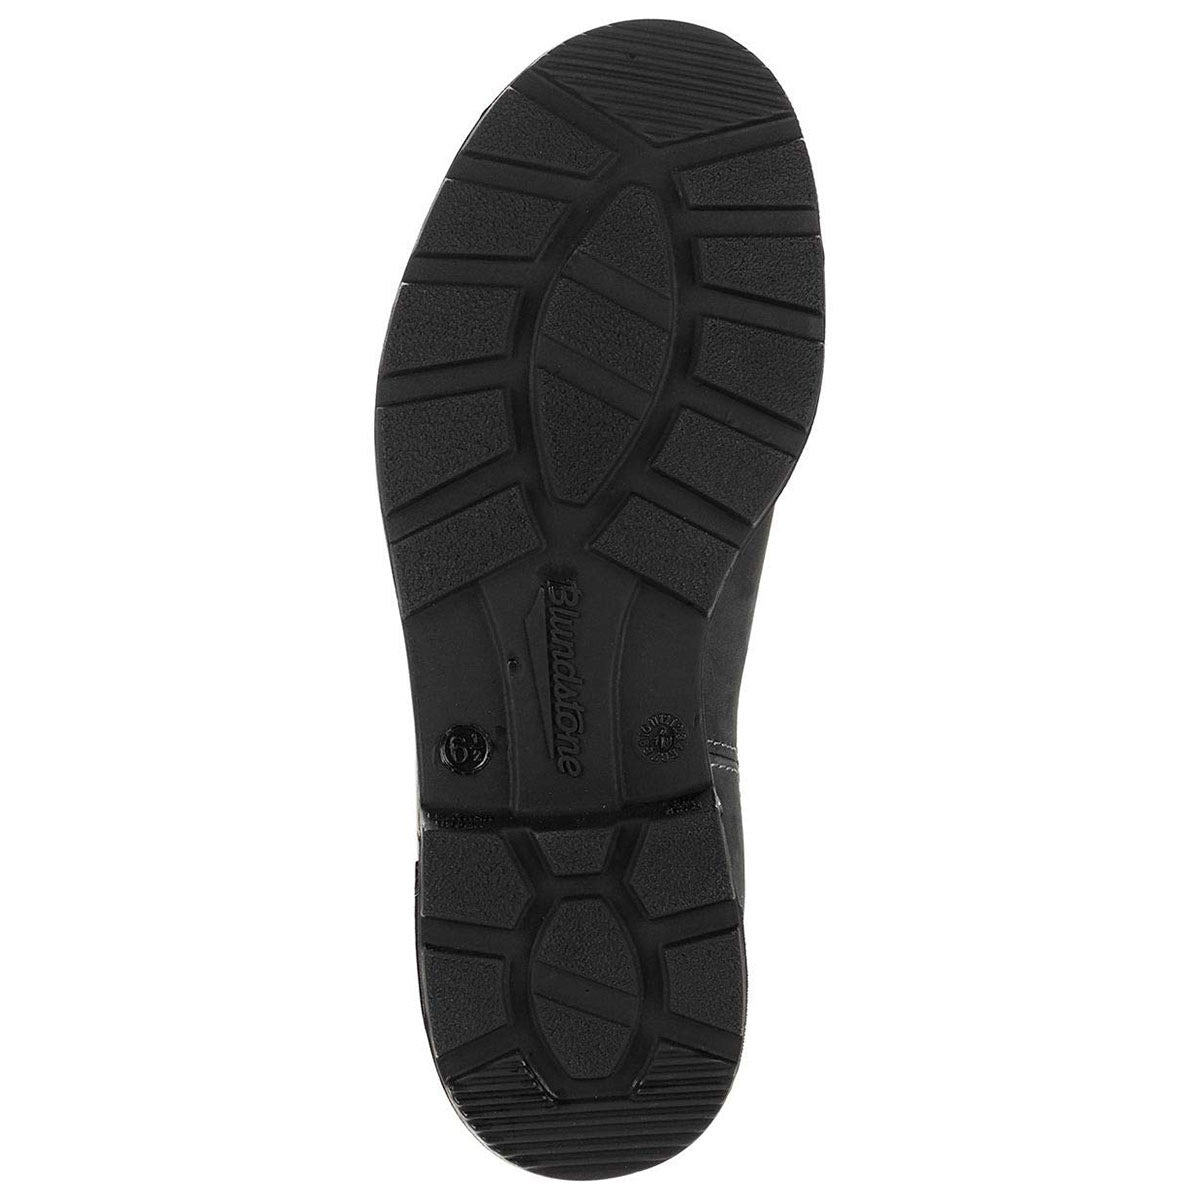 Sentence with the product replaced: Sole of a Blundstone BLUNDSTONE 1630 HIGH TOP RUSTIC BLACK - WOMENS shoe displaying tread pattern and brand logo, crafted from rustic black premium leather.